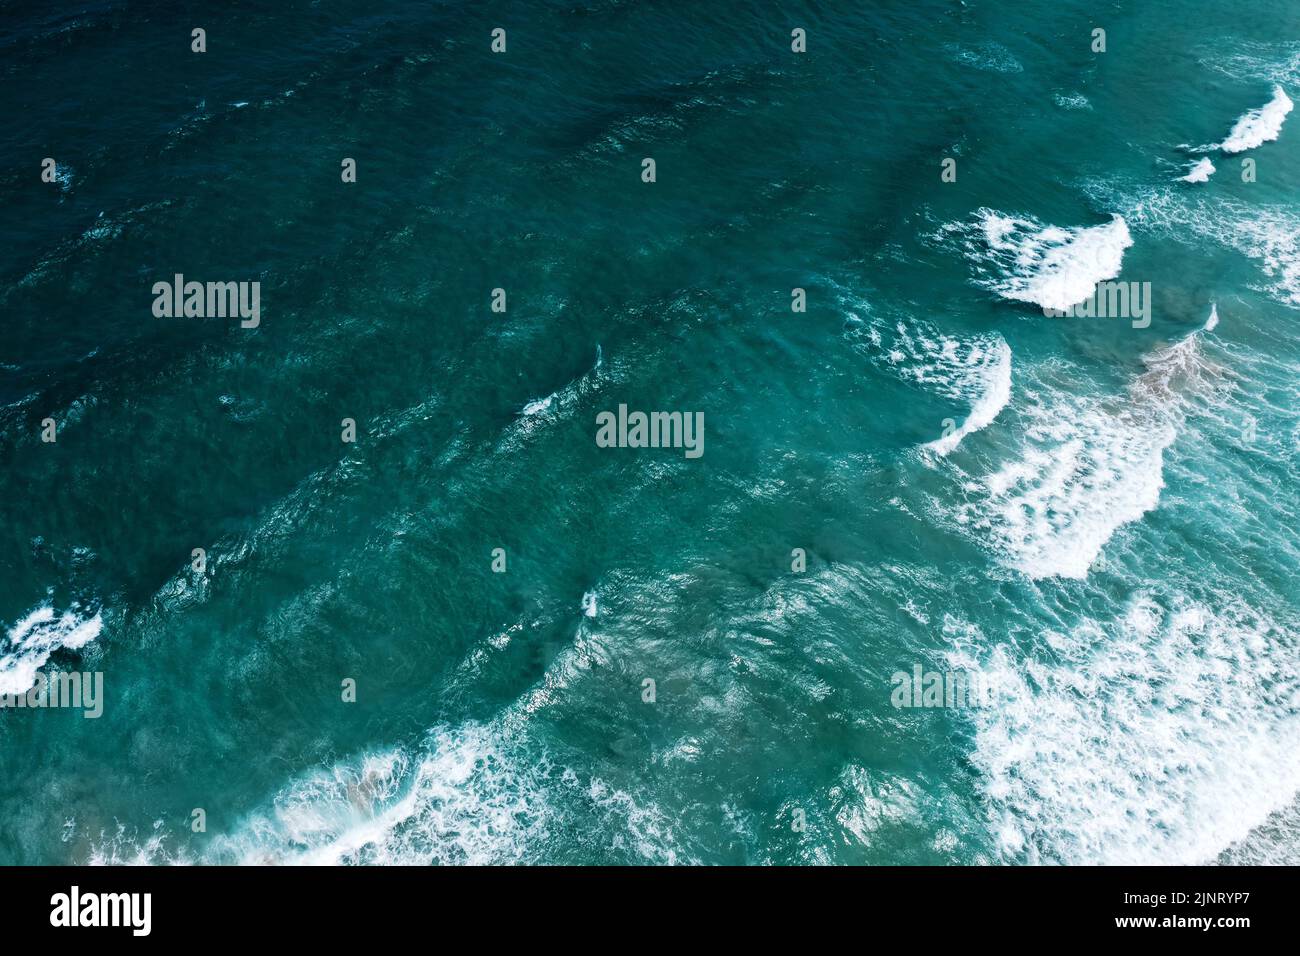 Tropical ocean with waves abstract at Tip of Borneo Kudat Sabah Borneo Stock Photo